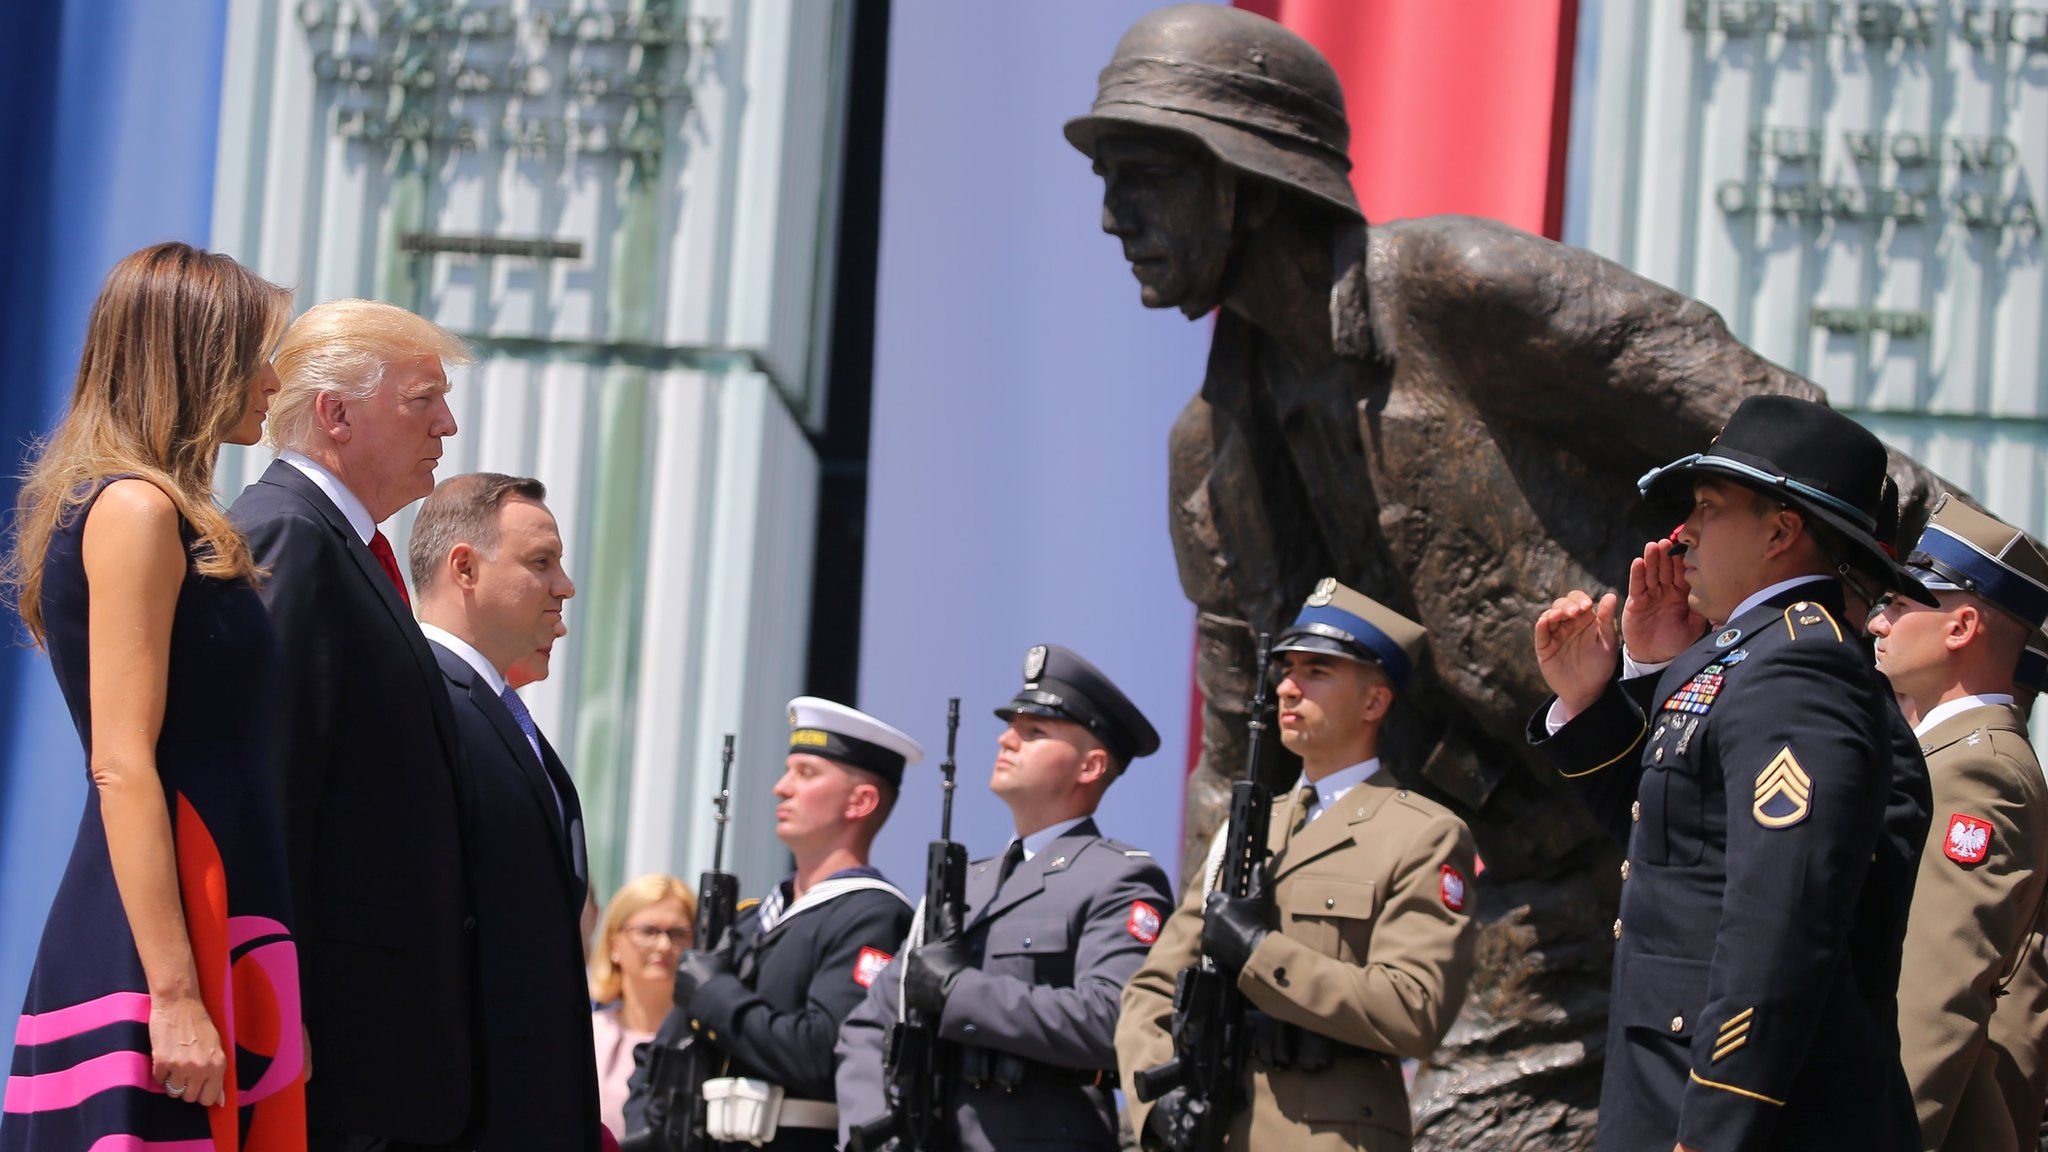 Donald Trump with his wife and Polish leaders at the Uprising Monument in Warsaw on 6 July 2017